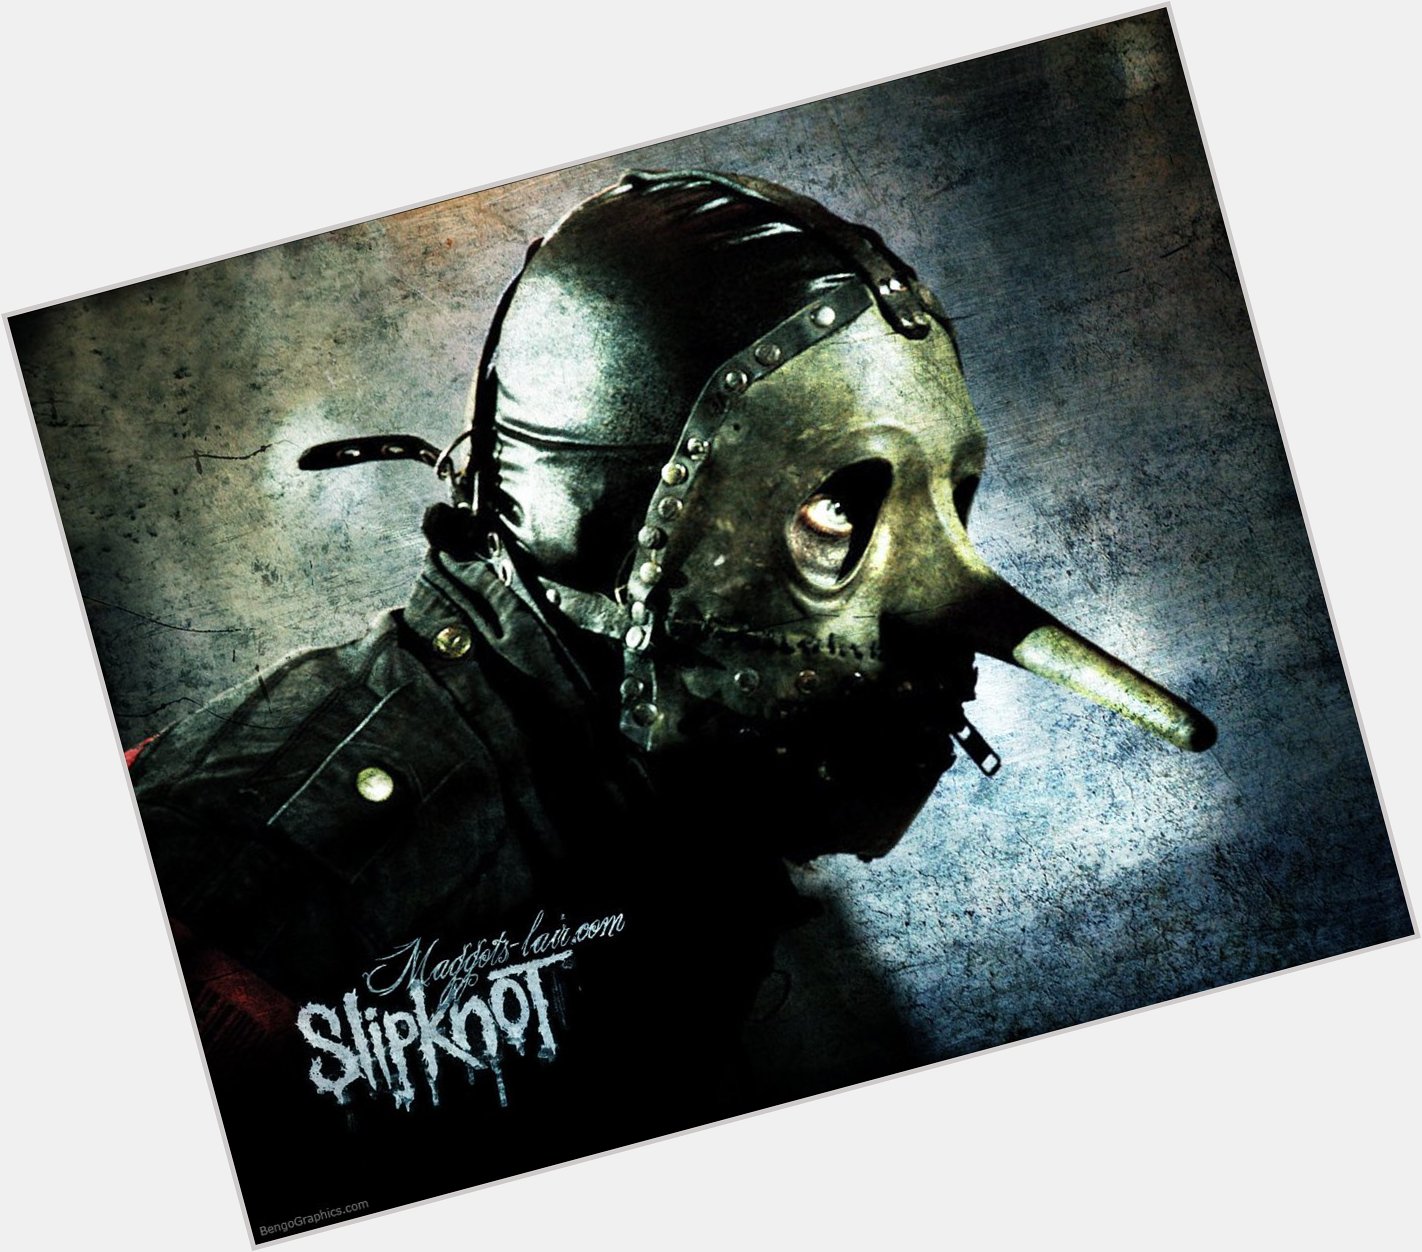 Happy birthday going out to Slipknot\s Chris Fehn  